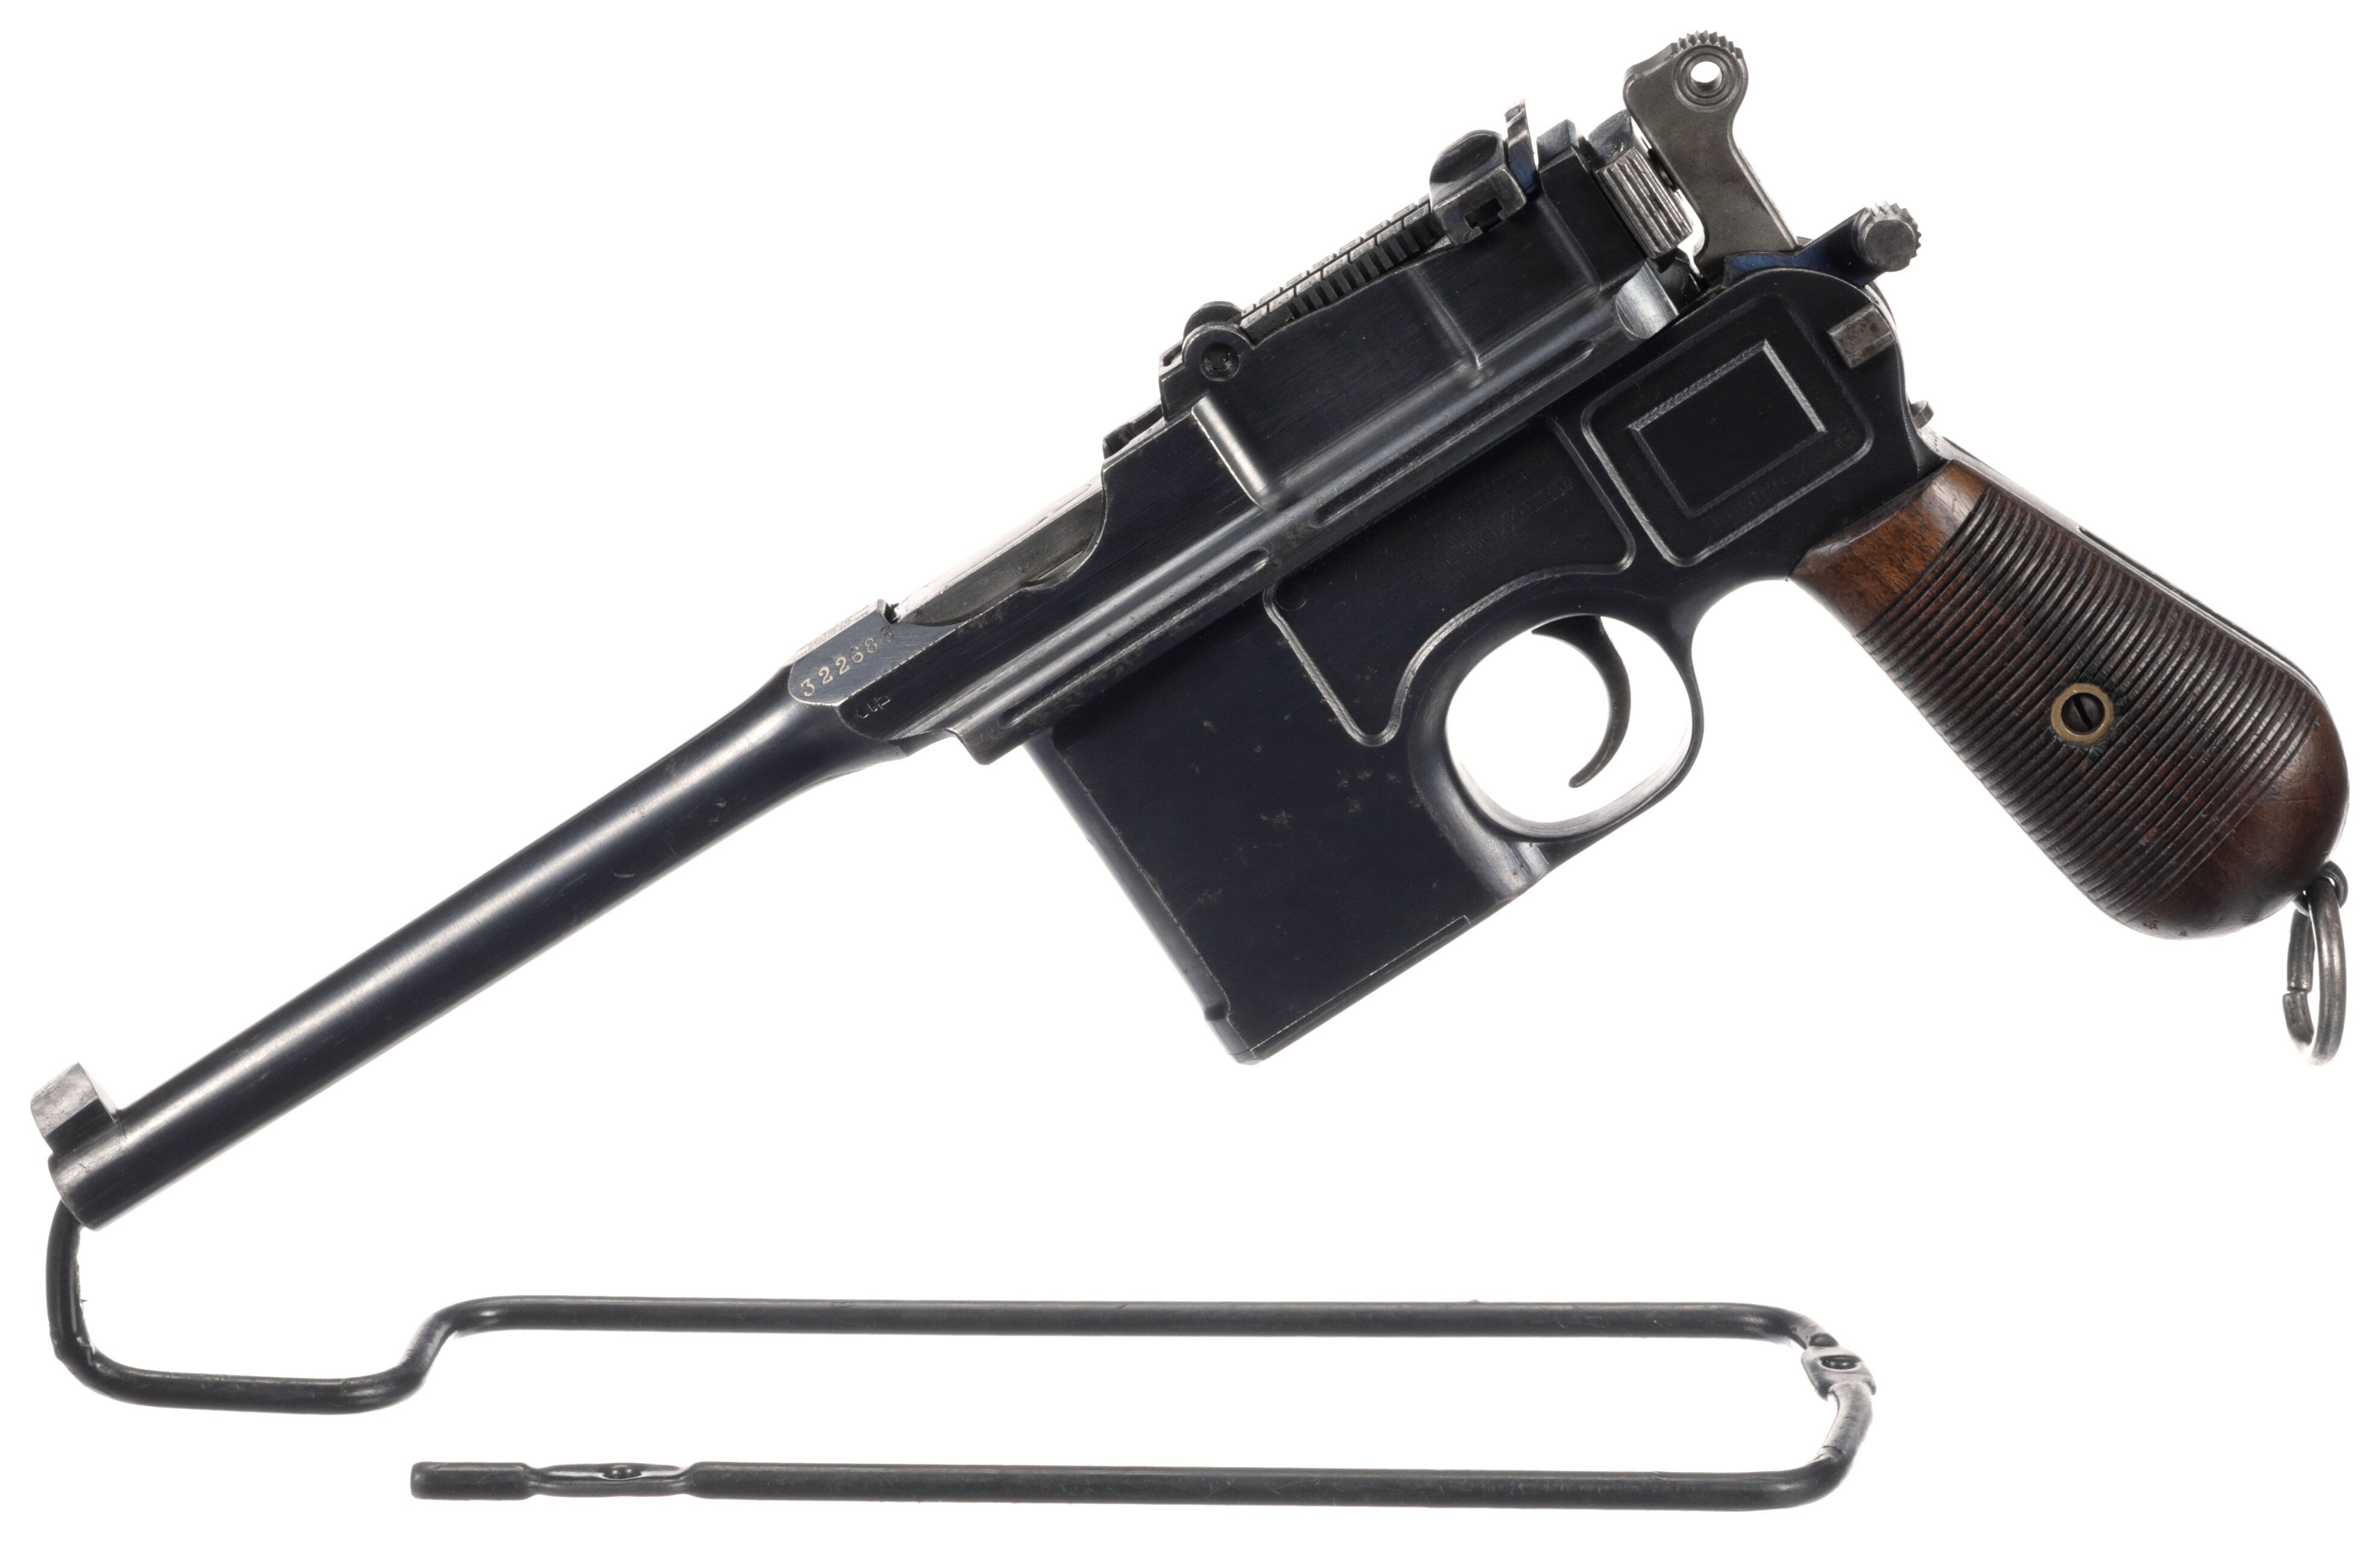 Mauser Military Broomhandle Semi Automatic Pistol With Stock Rig Rock Island Auction 6745